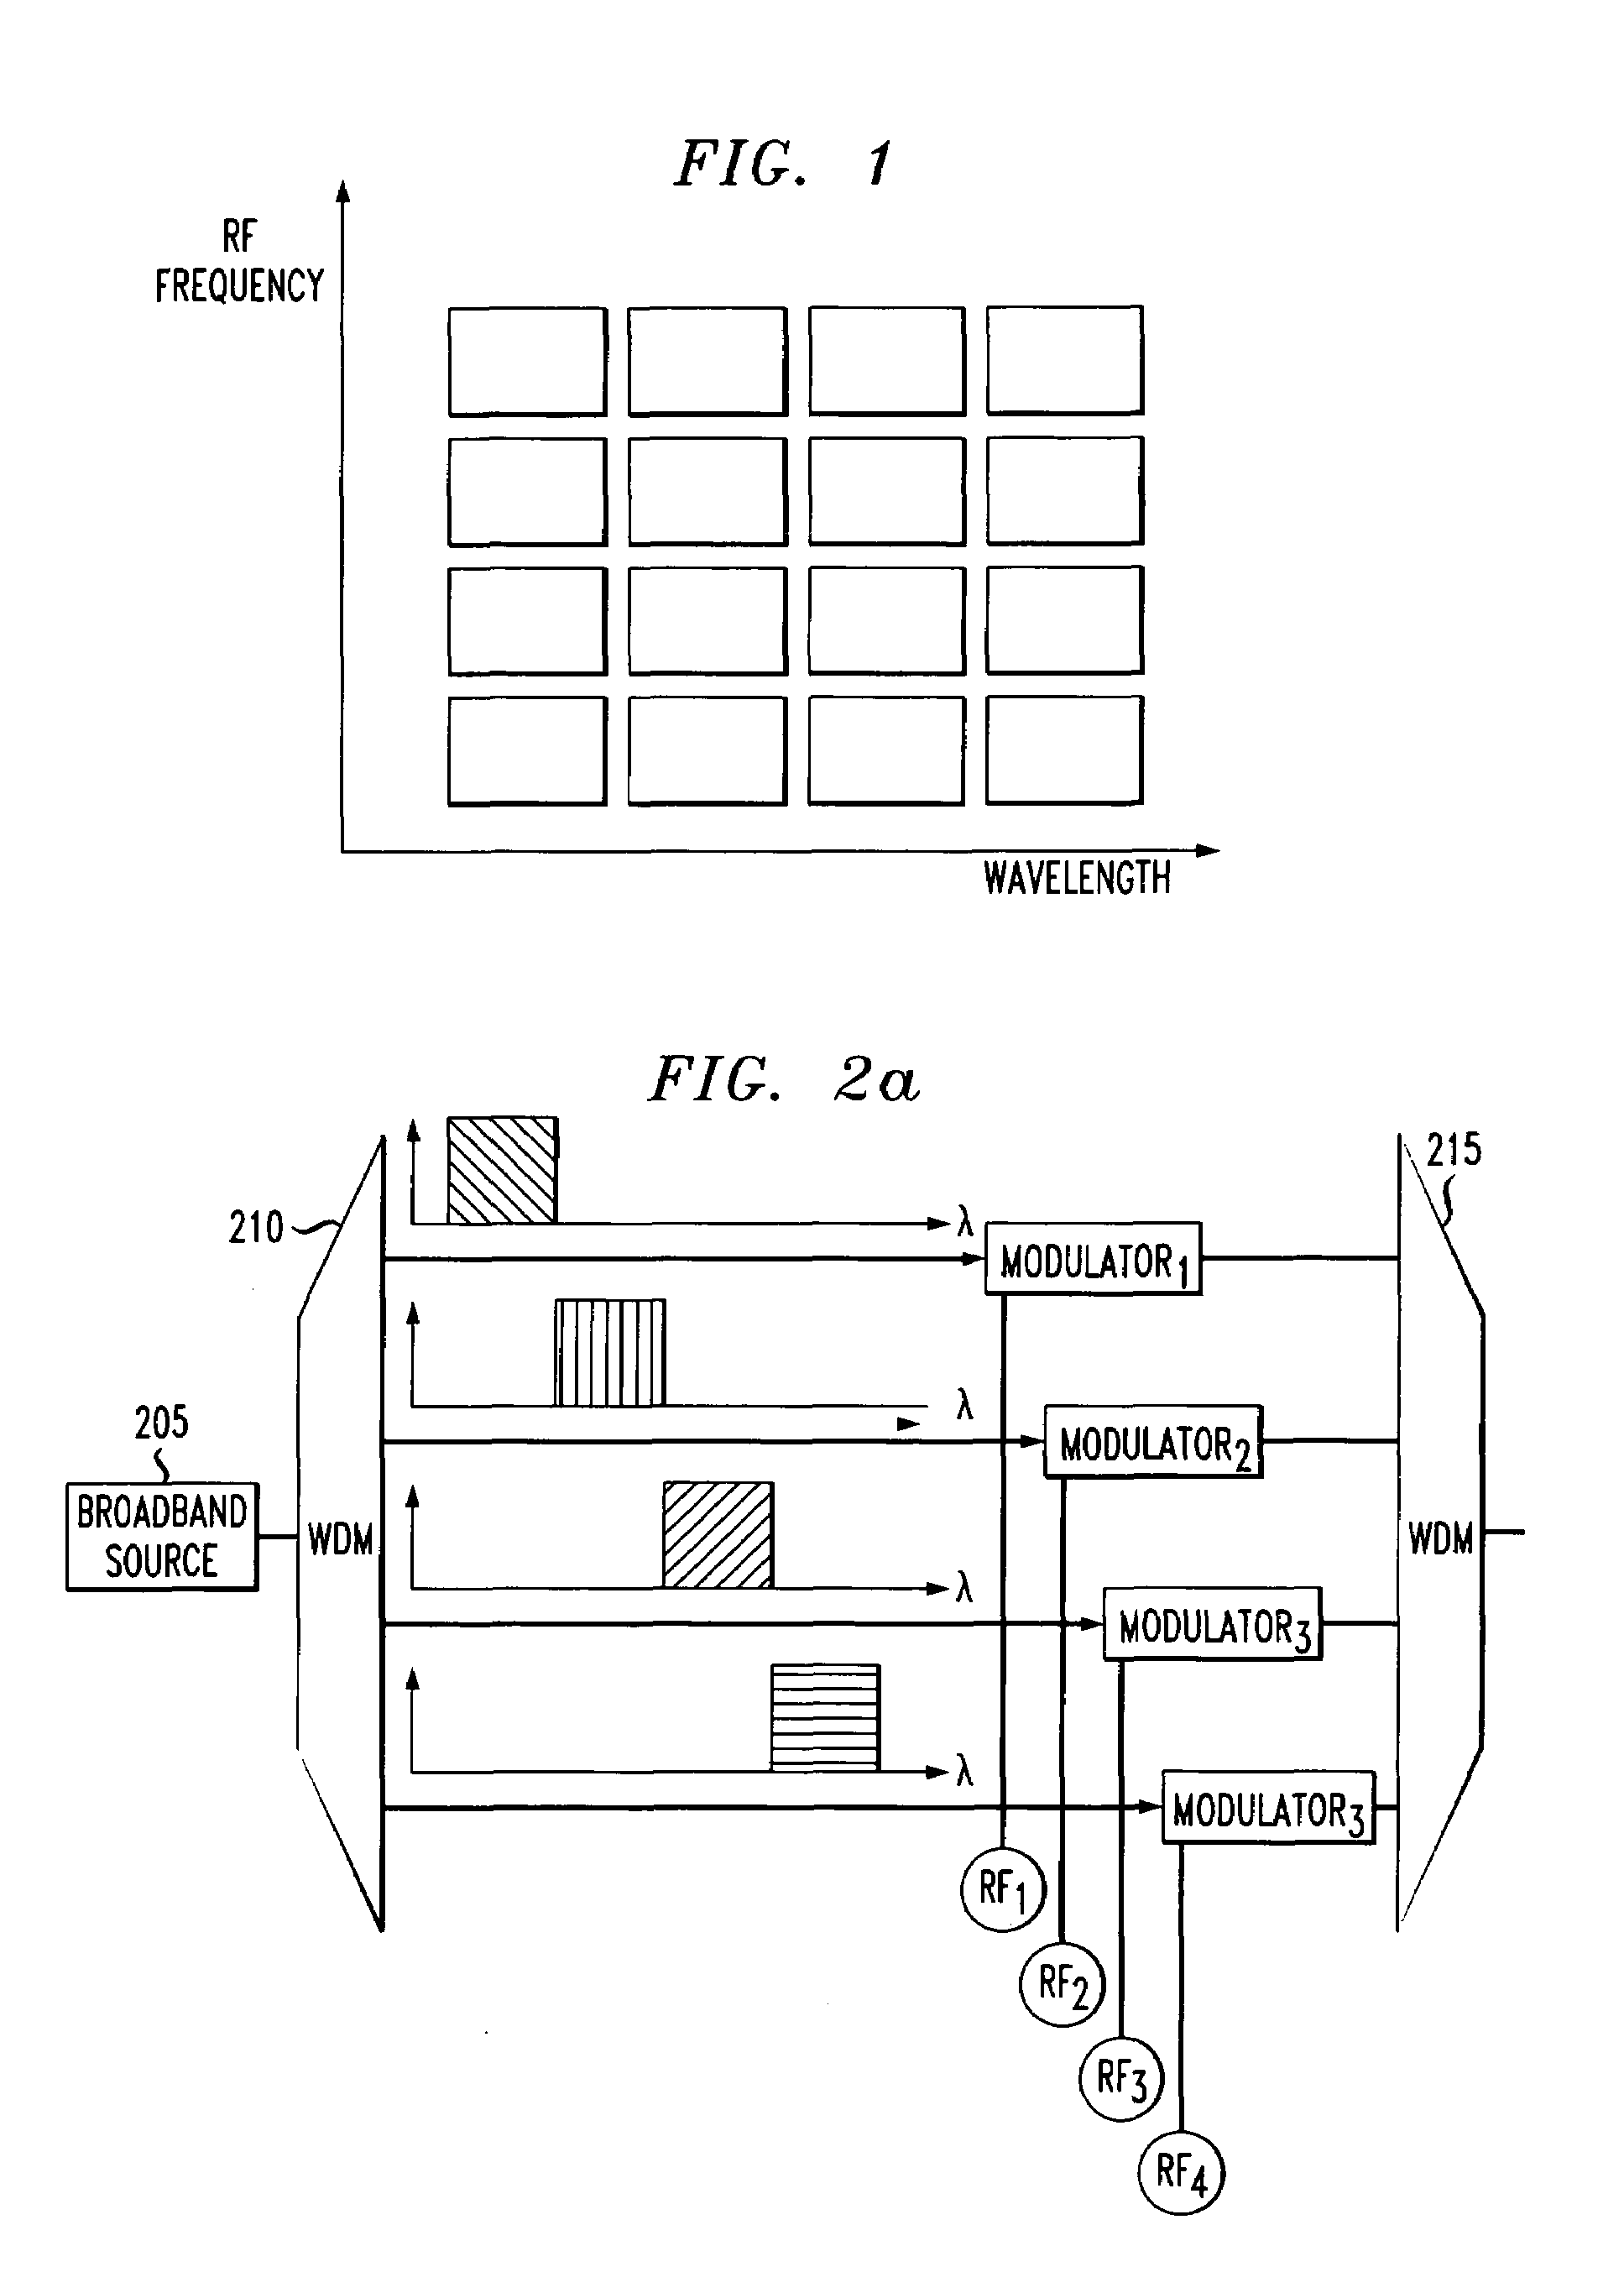 System for flexible multiple broadcast service delivery over a WDM passive optical network based on RF block-conversion of RF service bands within wavelength bands